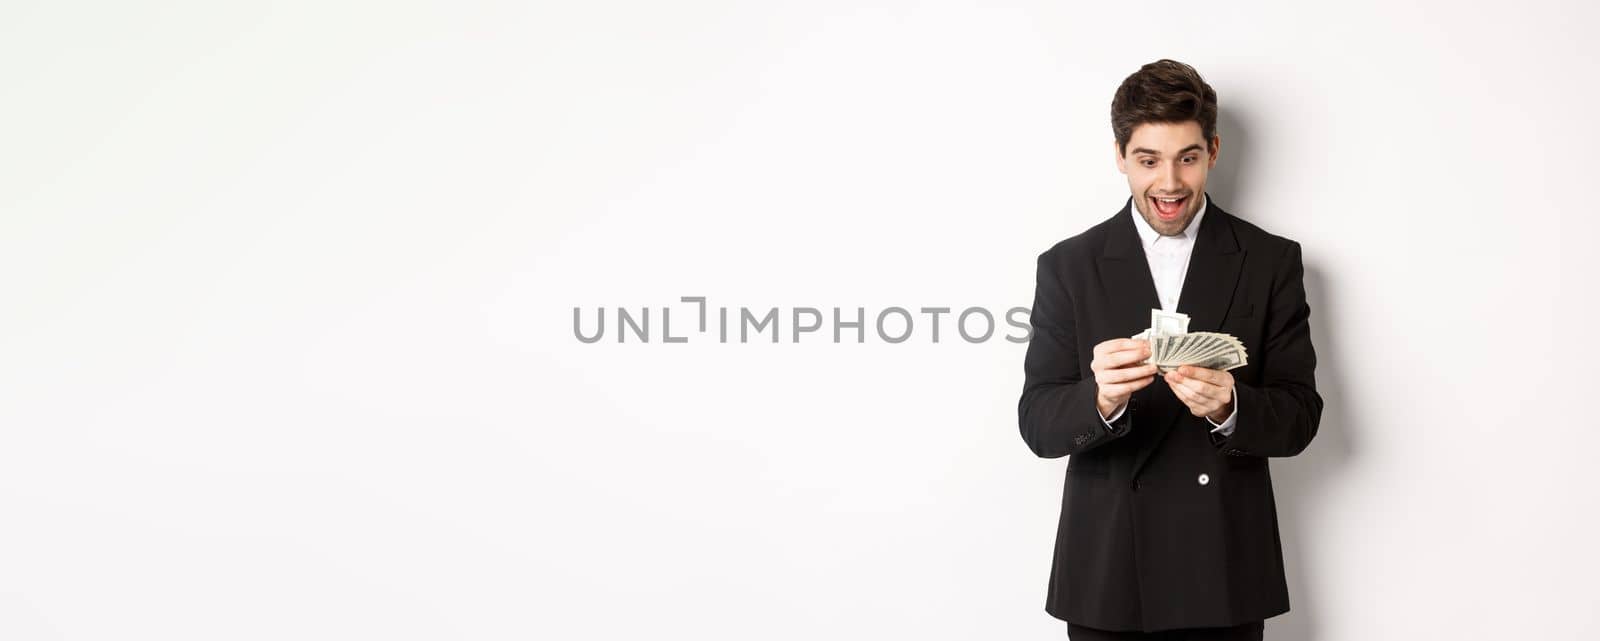 Image of excited handsome businessman, counting money and smiling amused, standing against white background in suit.